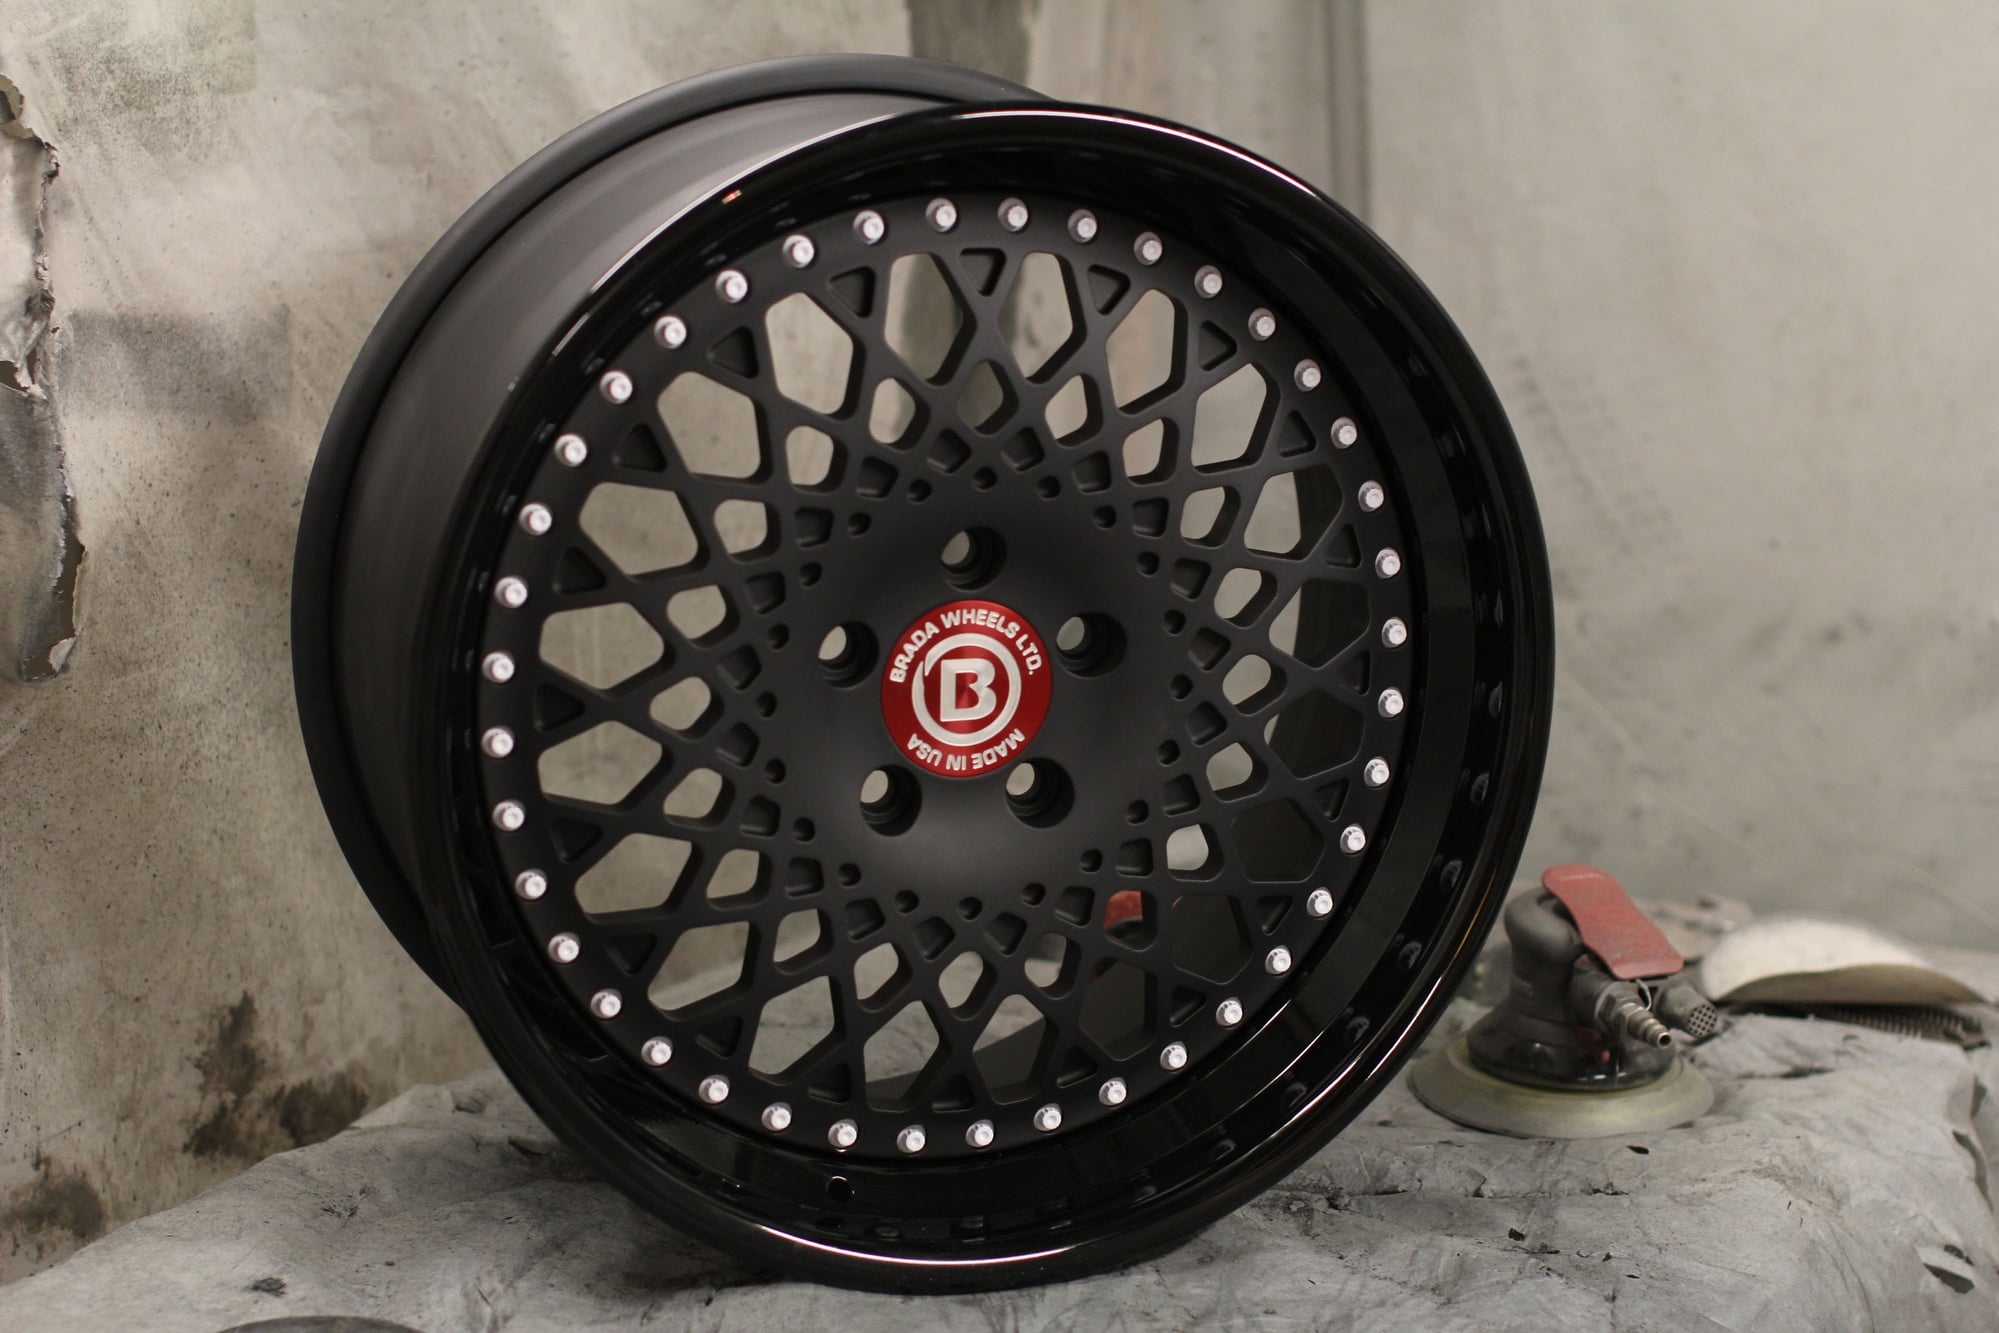 Extra Set of Brada Wheels BR1 in E55 fitment for deal! Forums